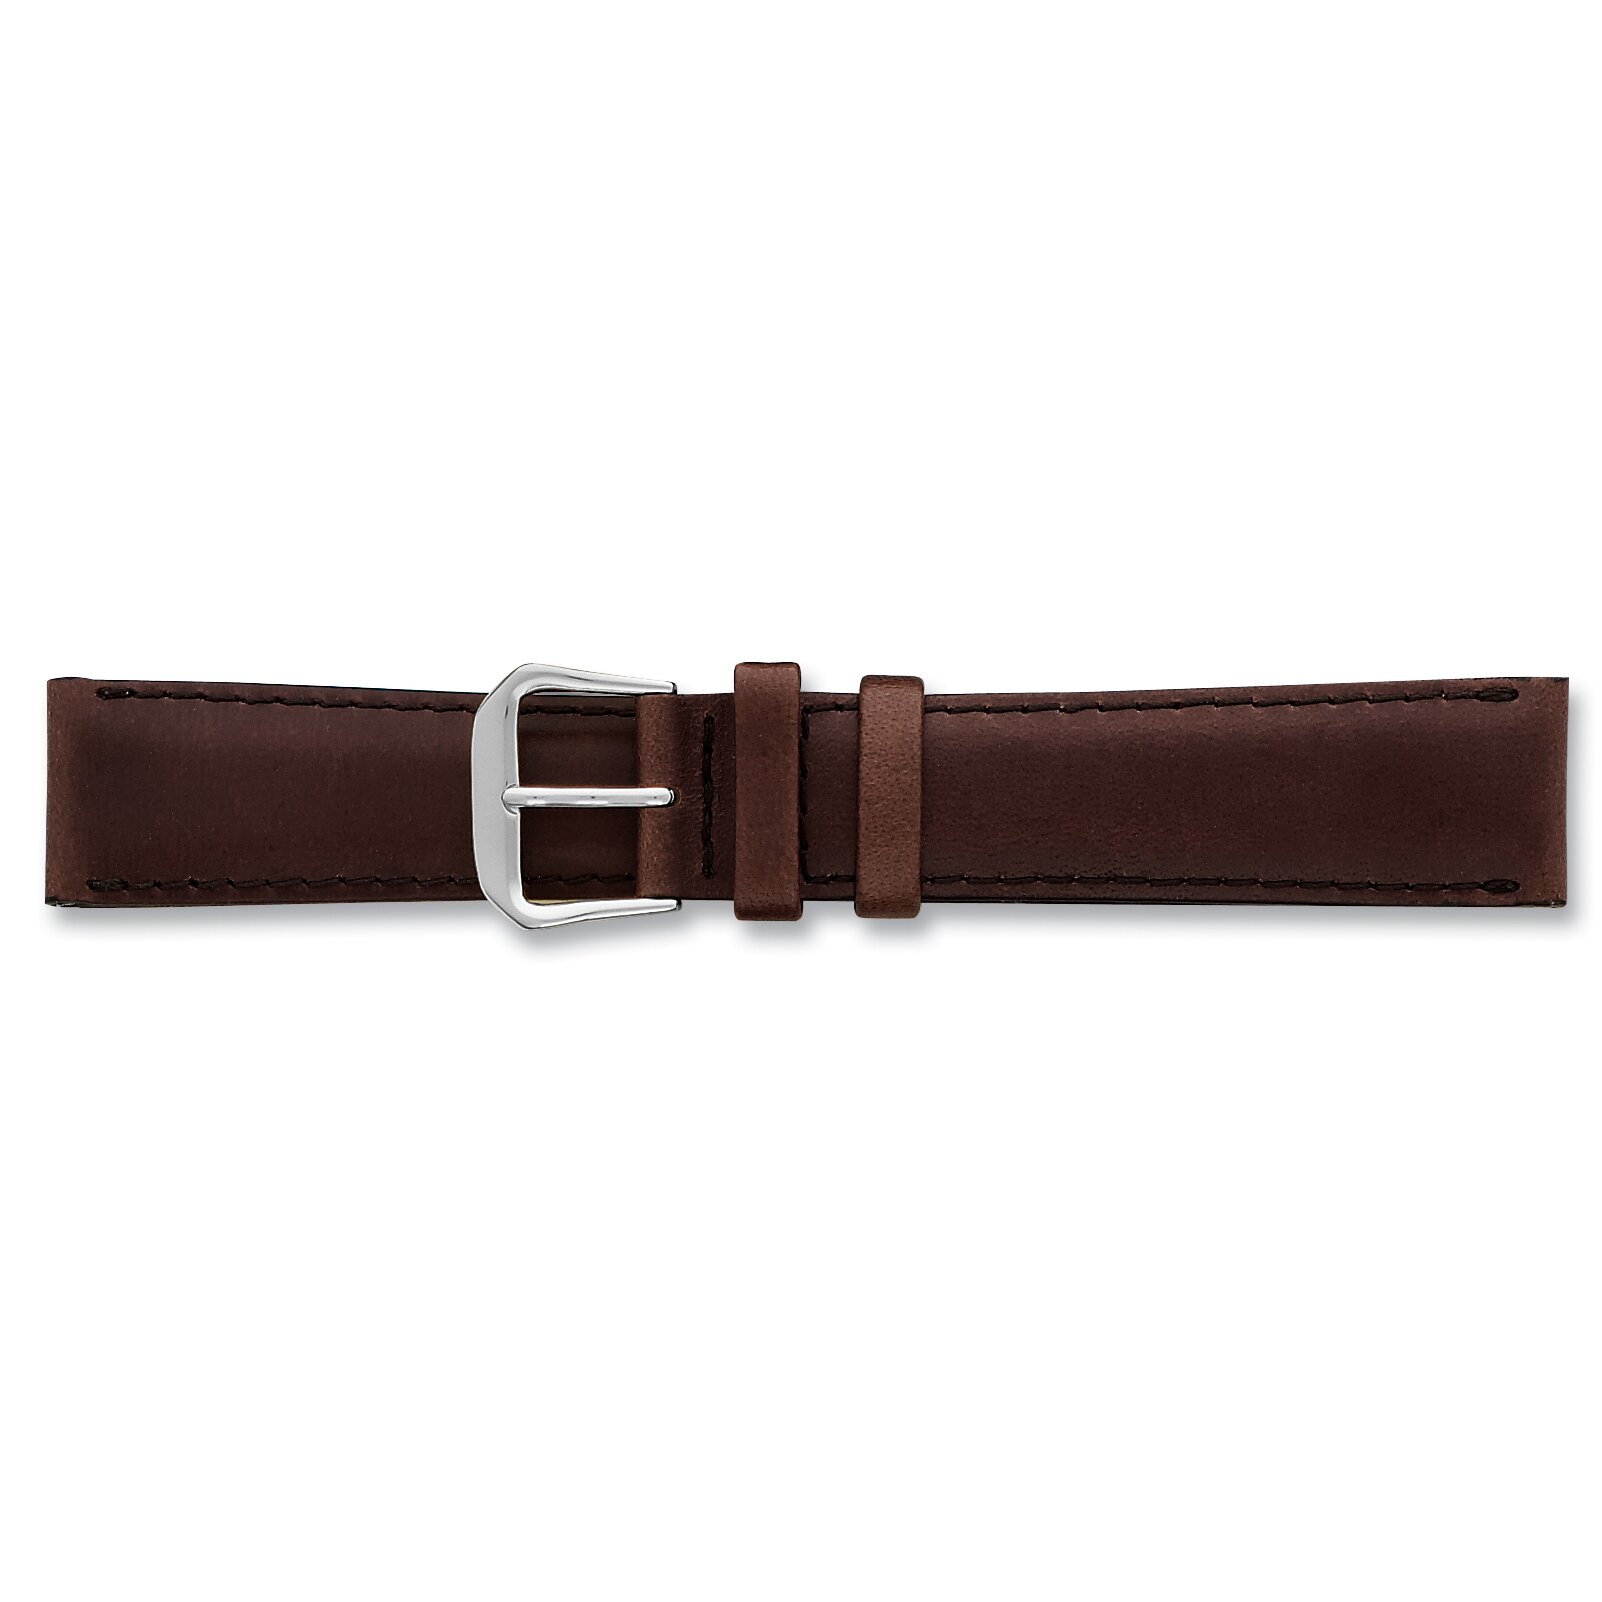 Findingking de Beer Brown Leather Watch Band 19mm Silver Color